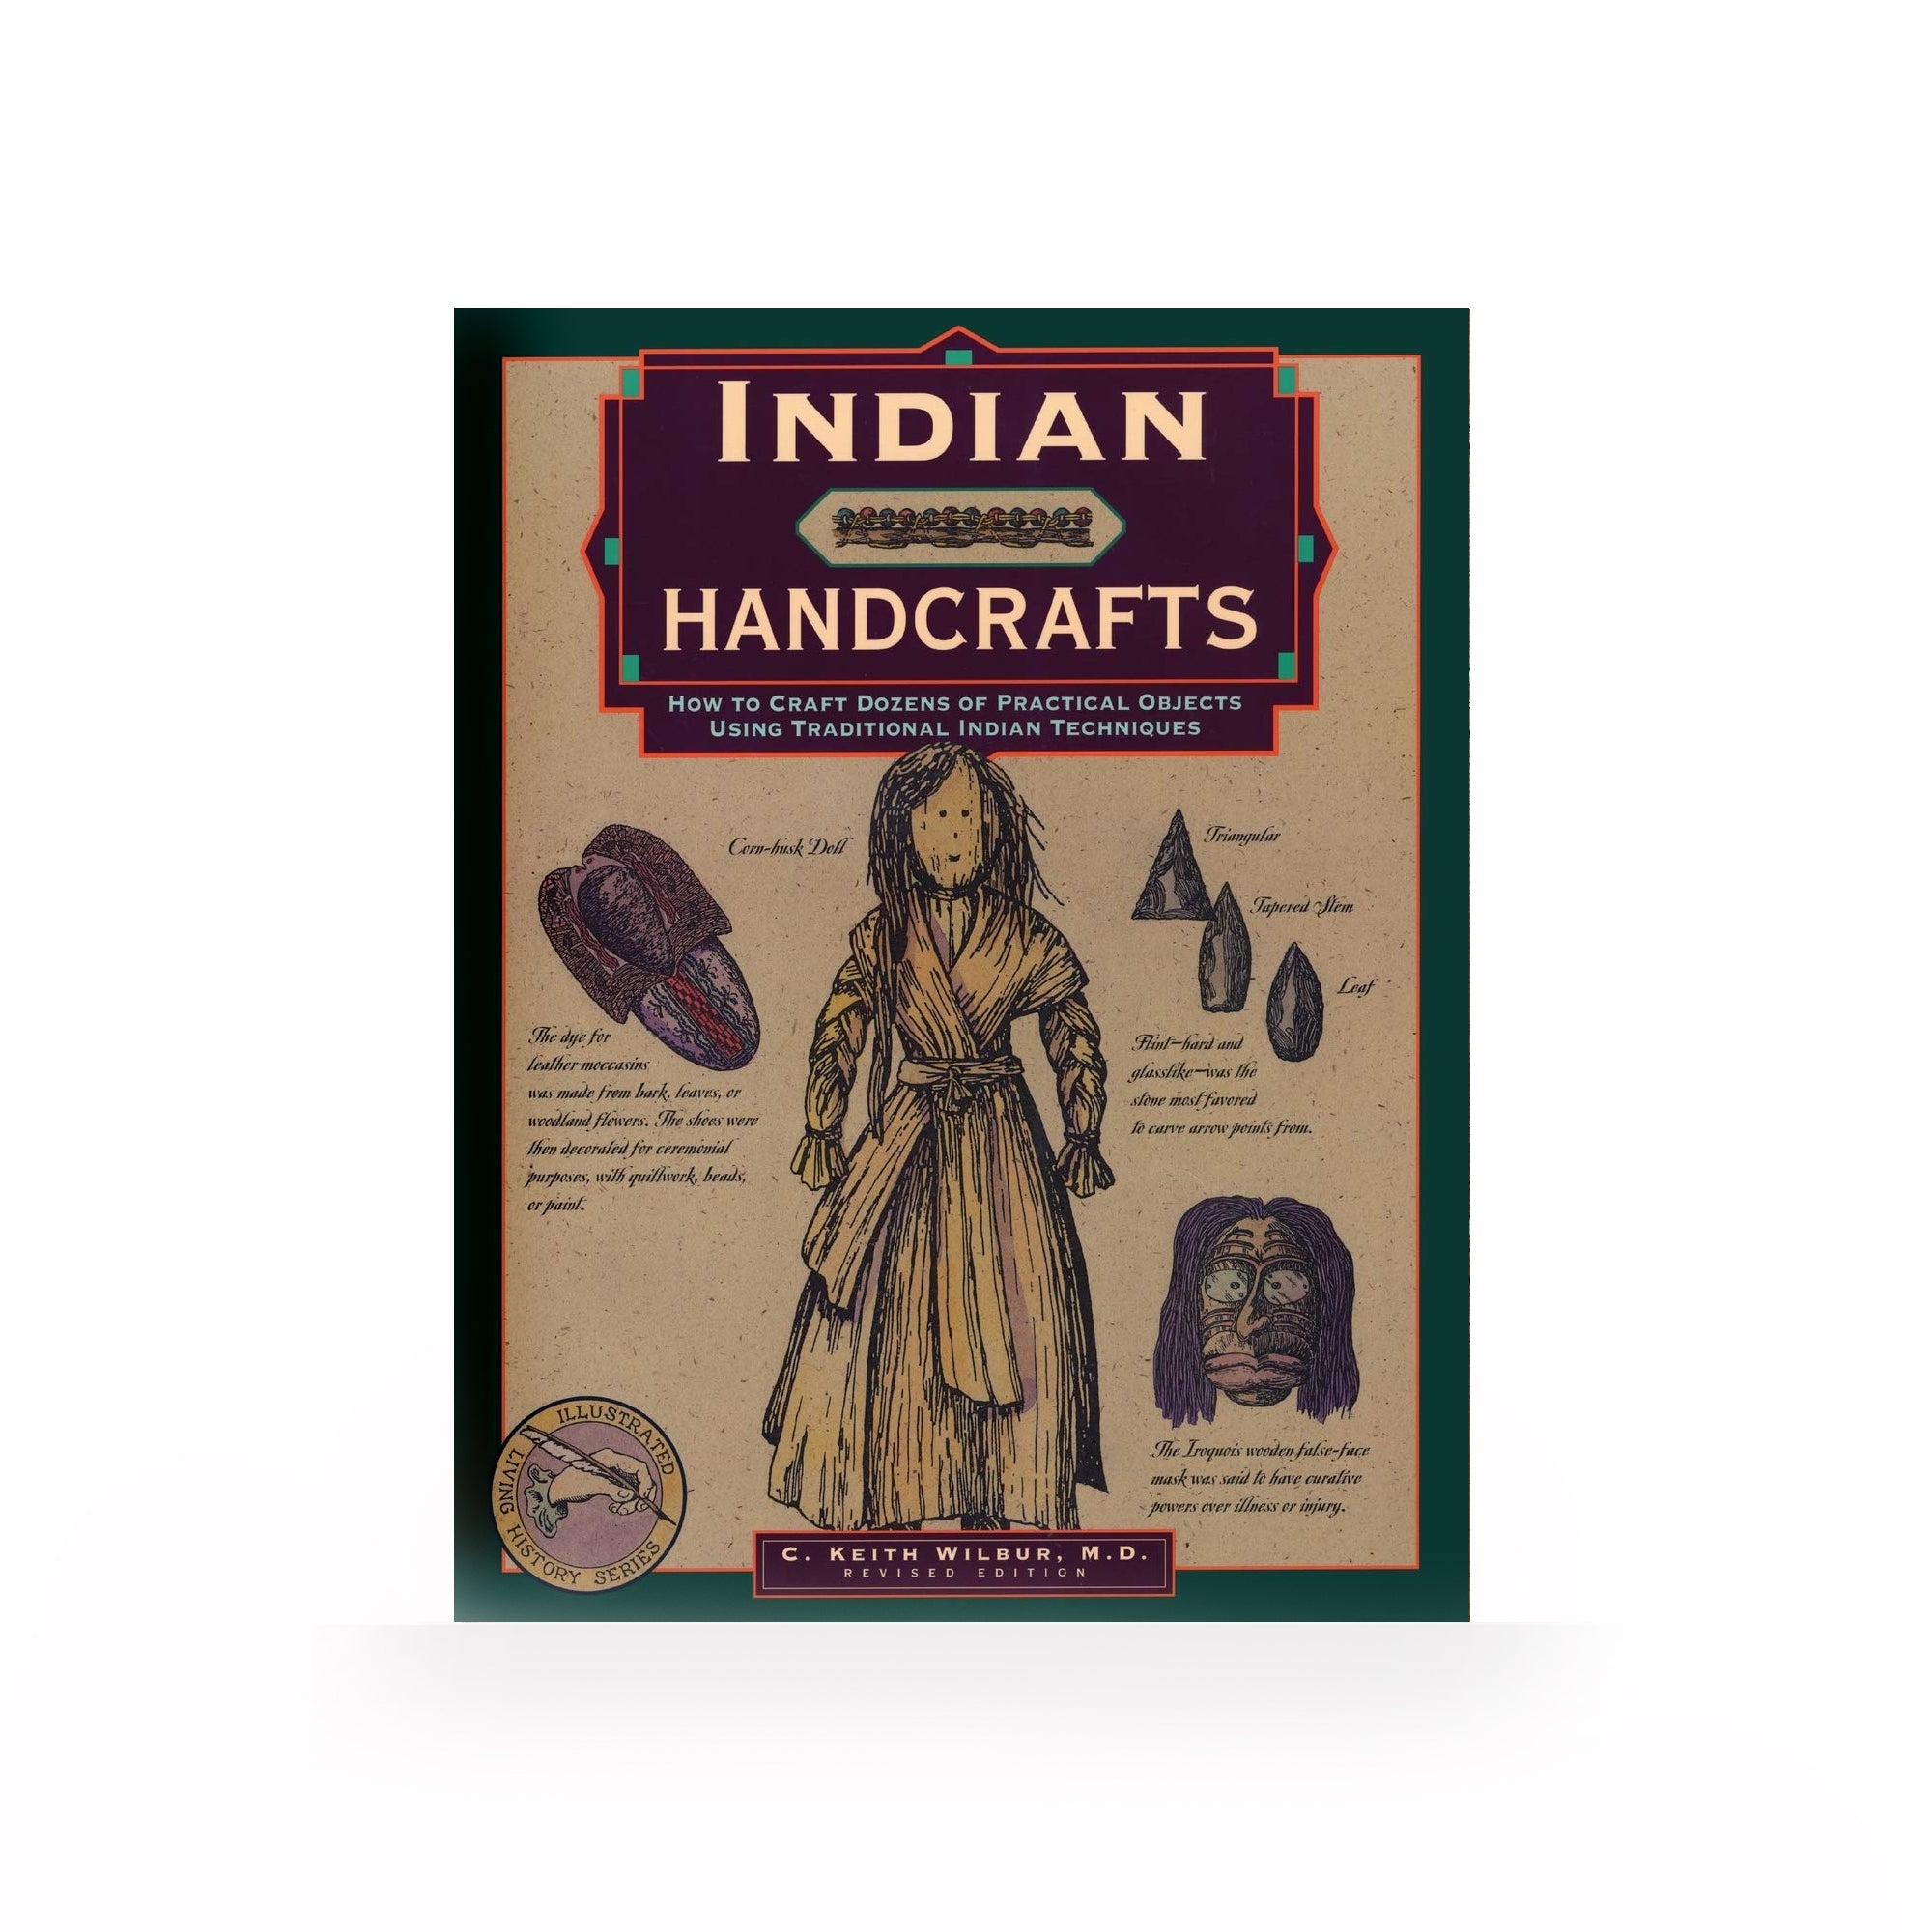 Indian Handcrafts by C.Keith Wilbur from Identity Leathercraft